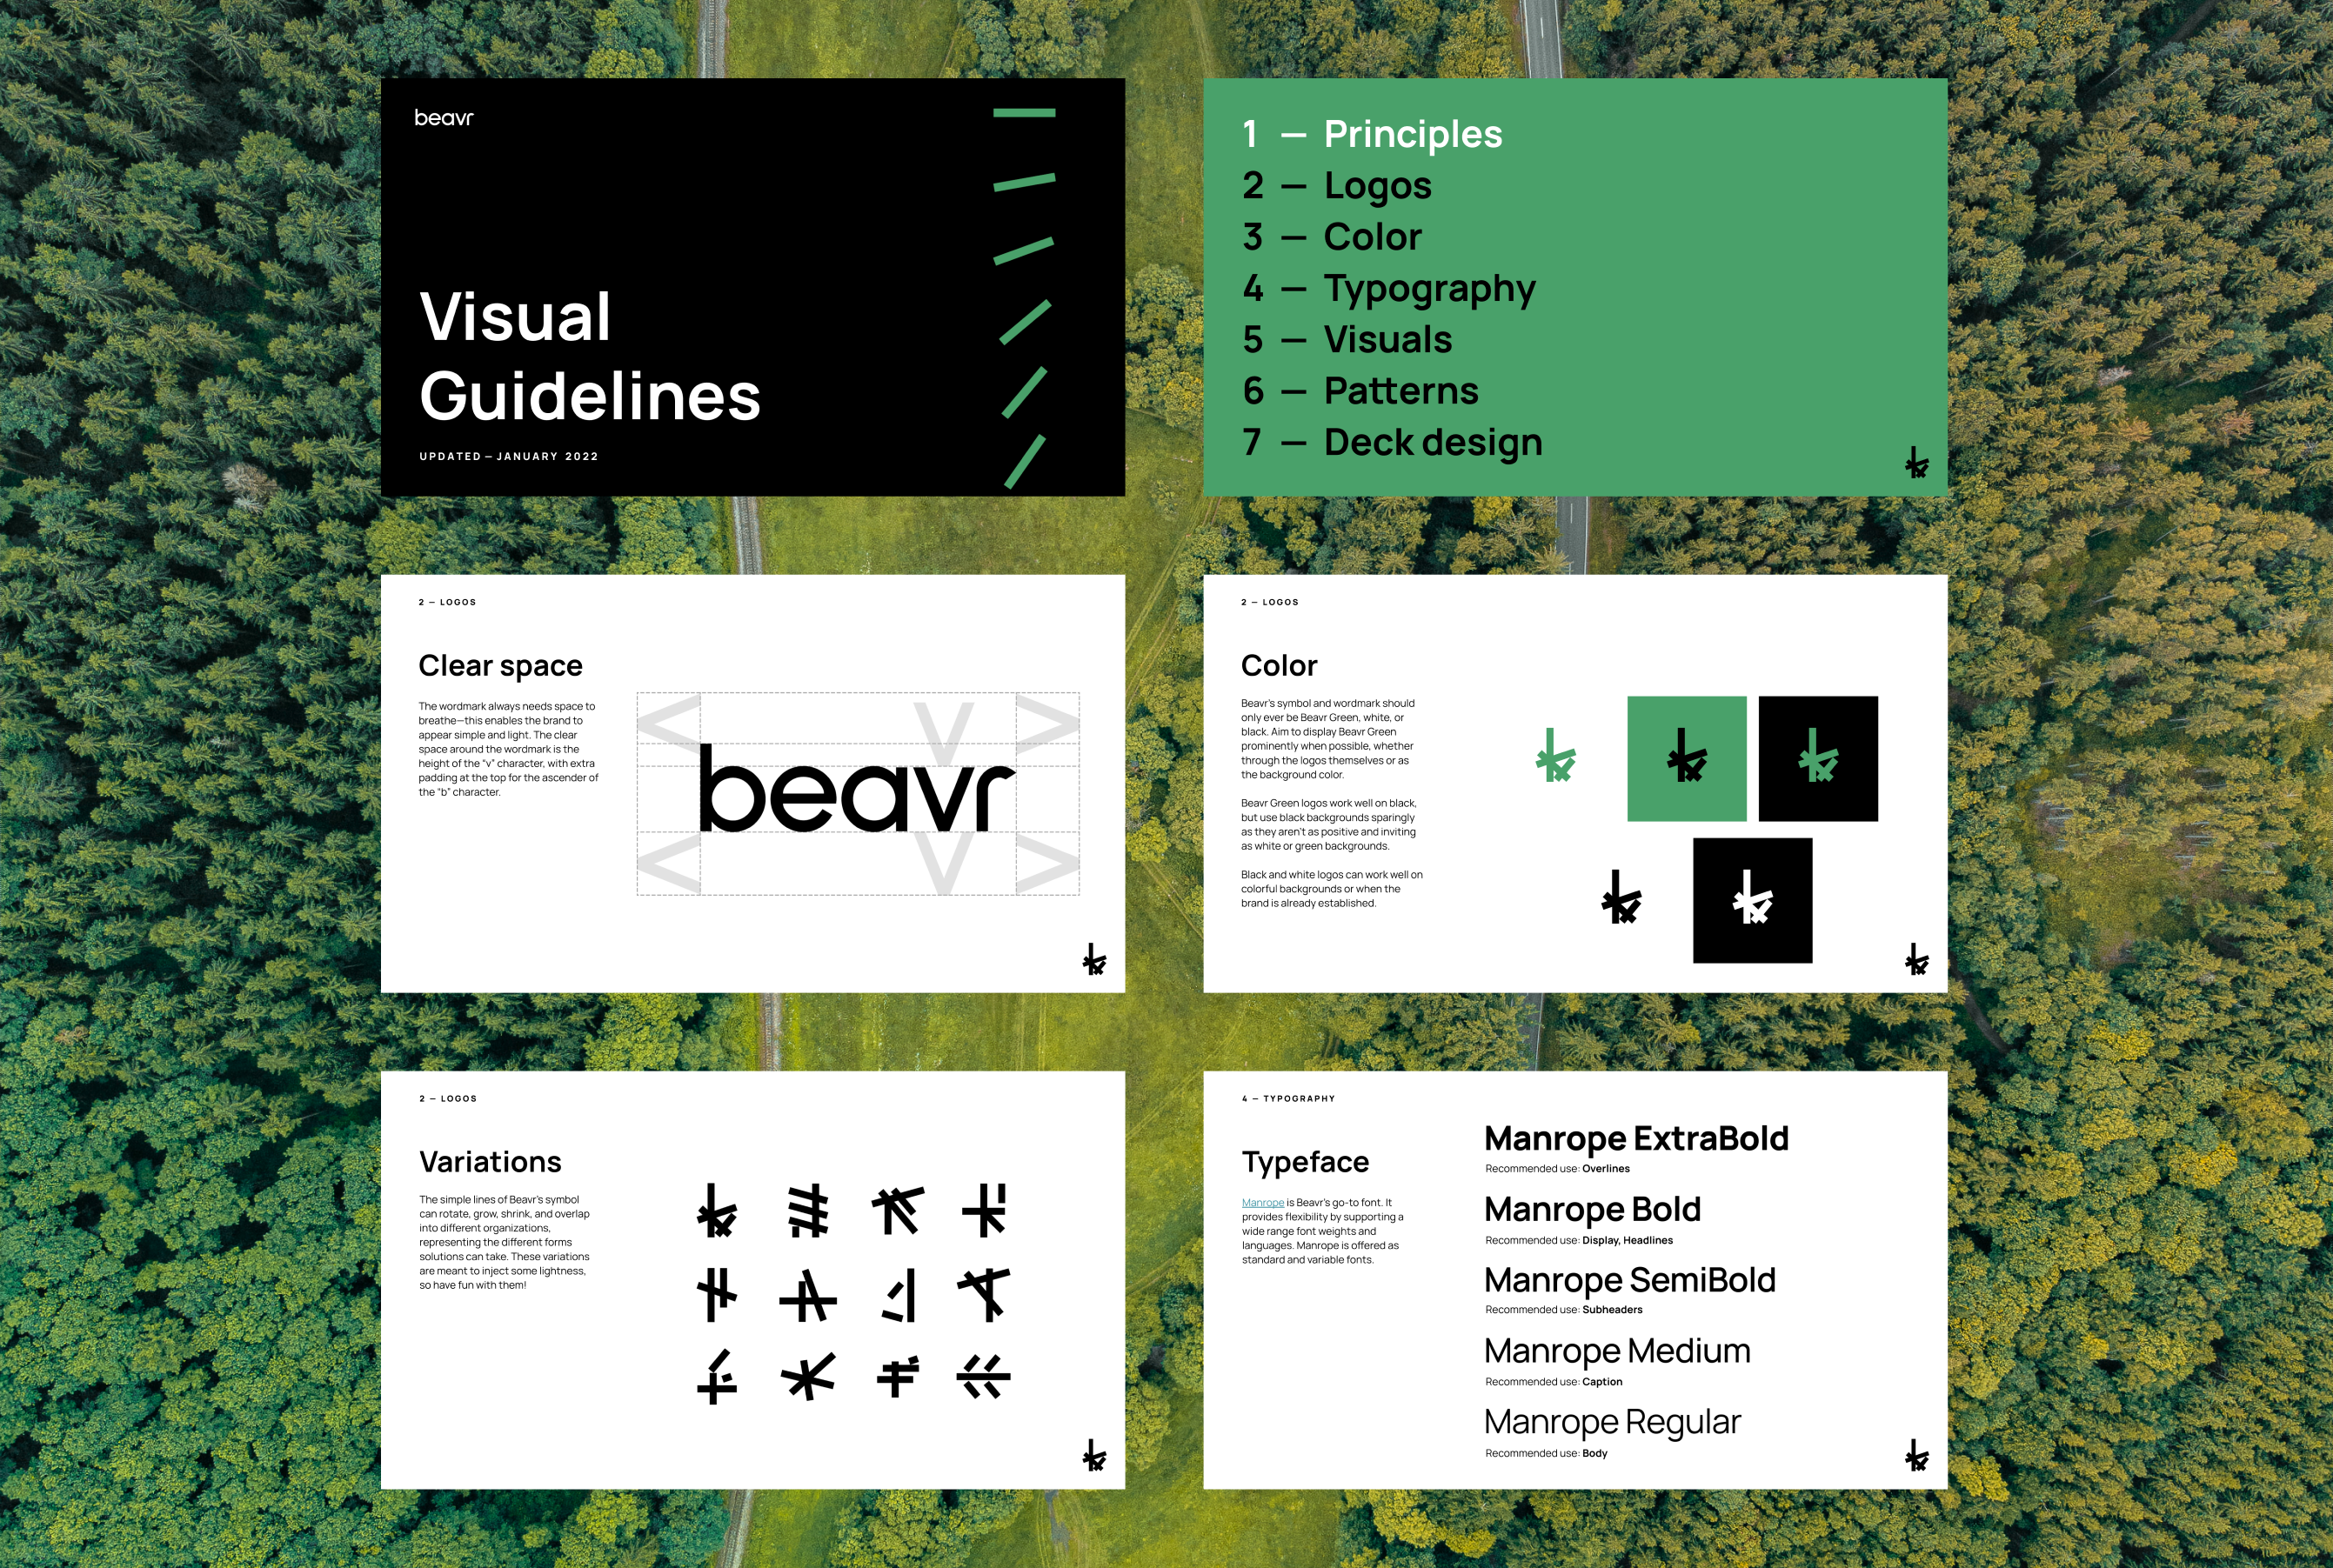 Excerpts from Beavr's Style Guide deck